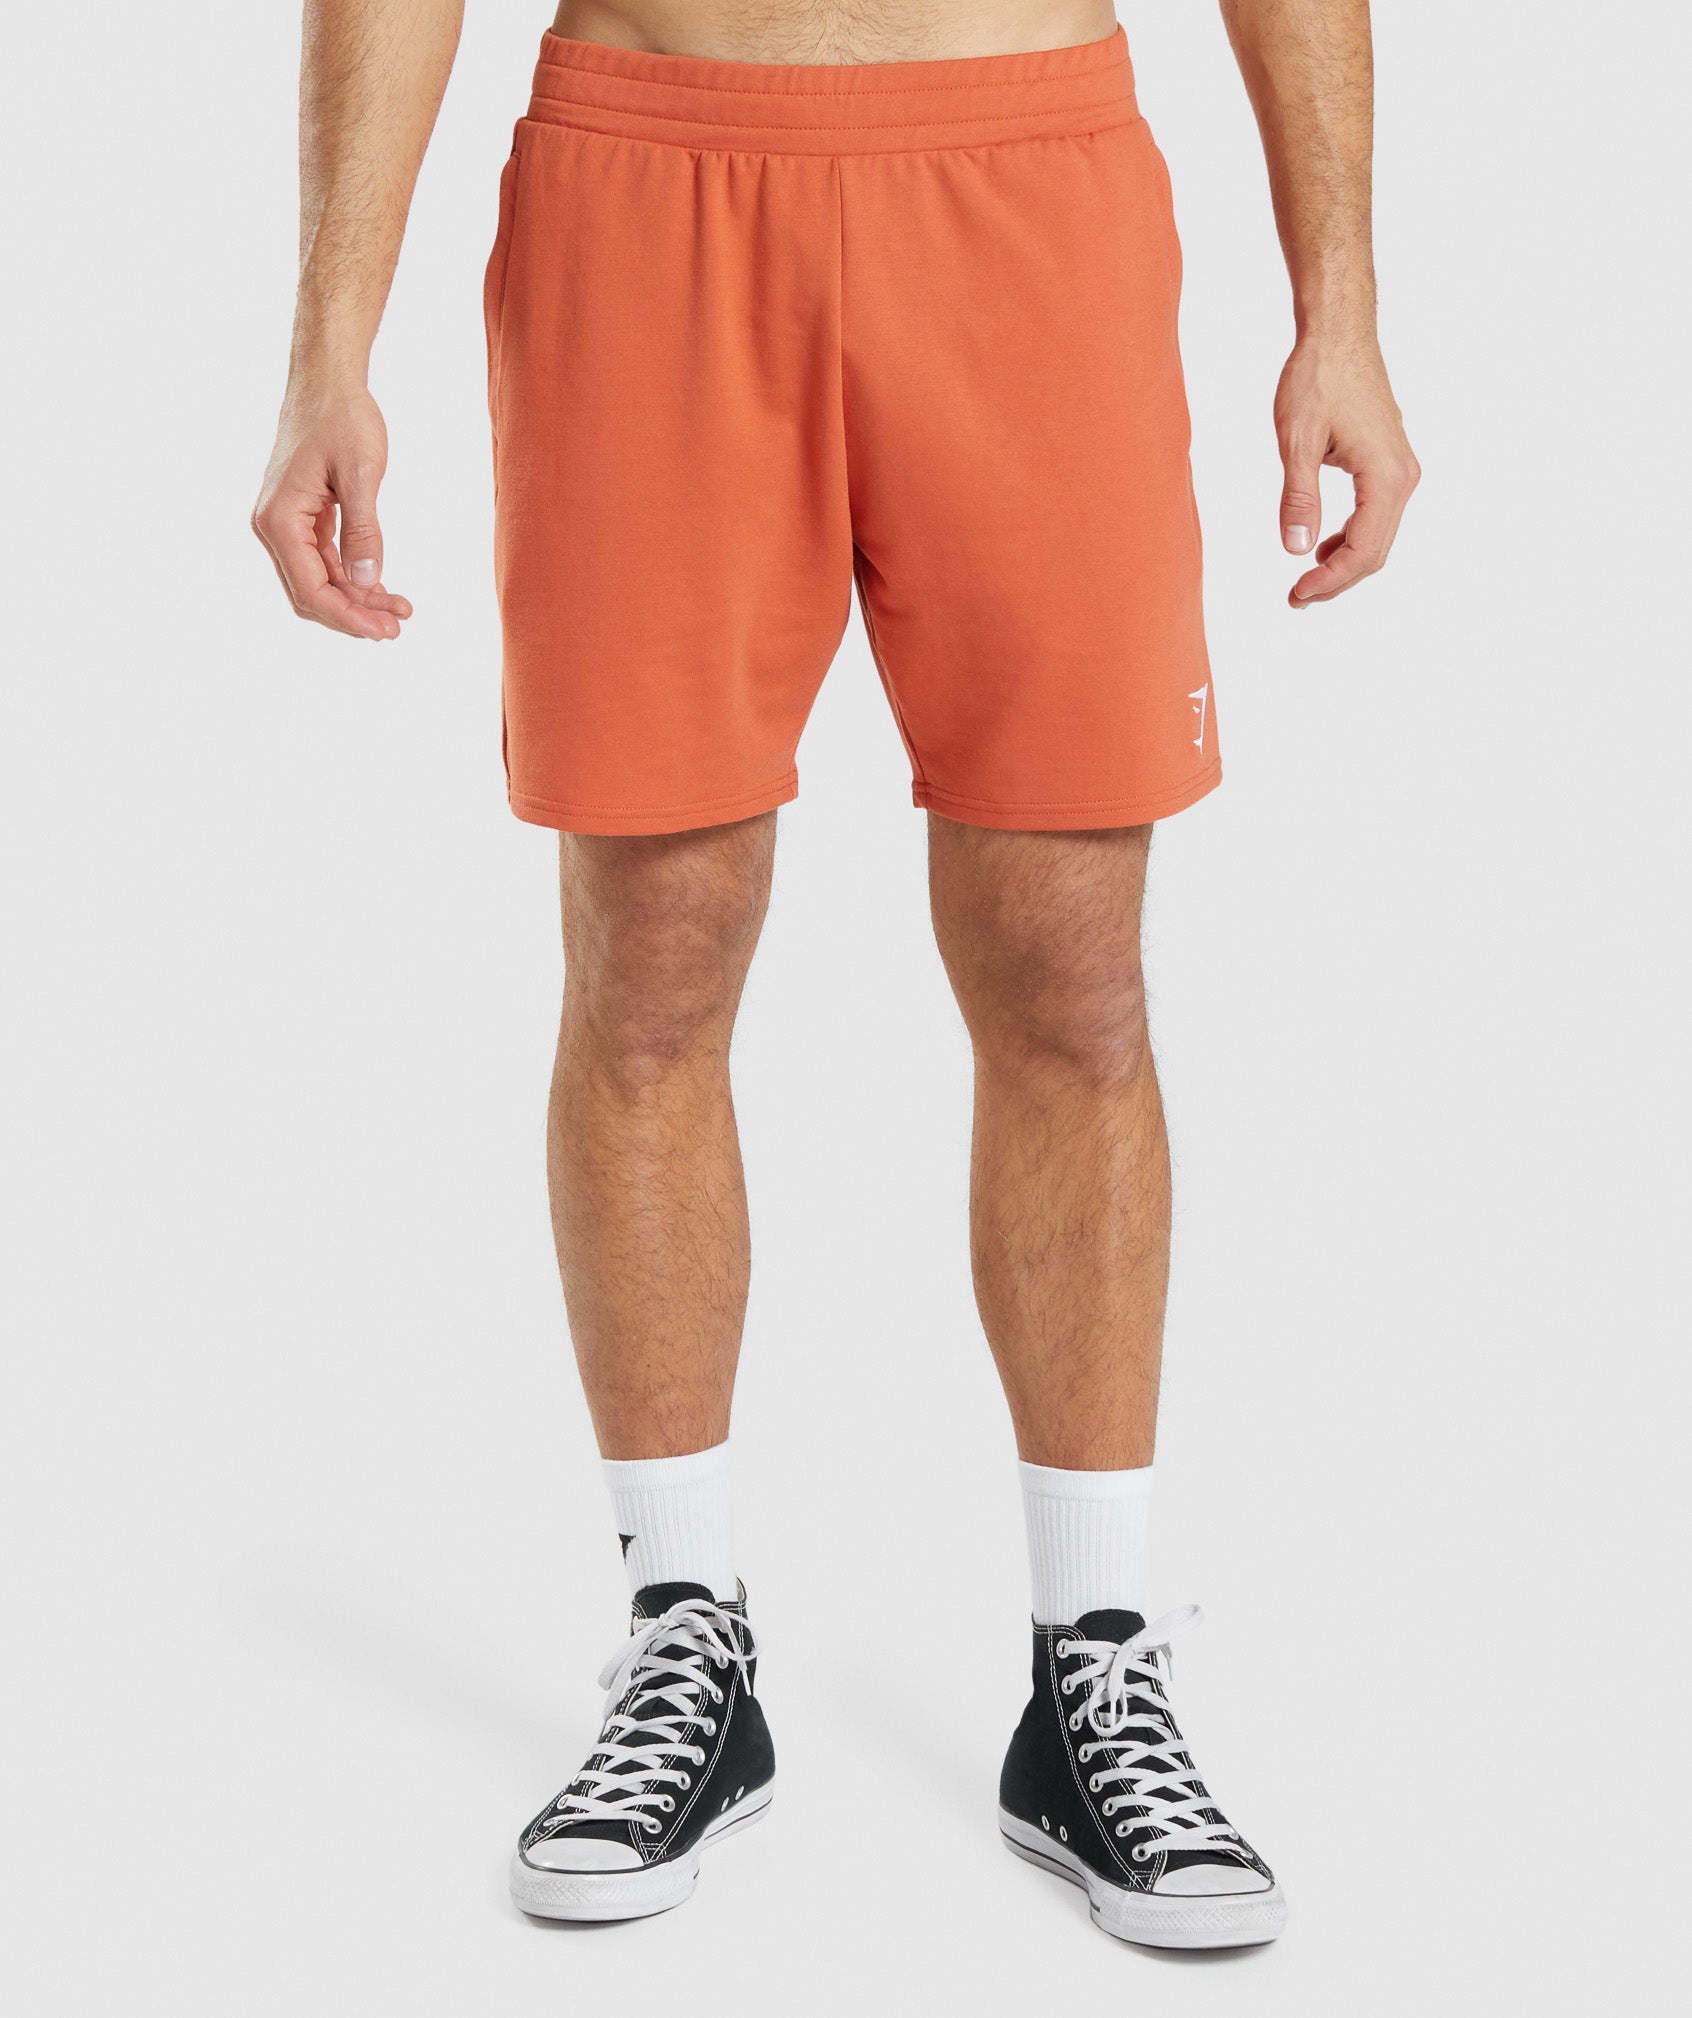 Critical 7" Shorts in Clay Orange - view 1